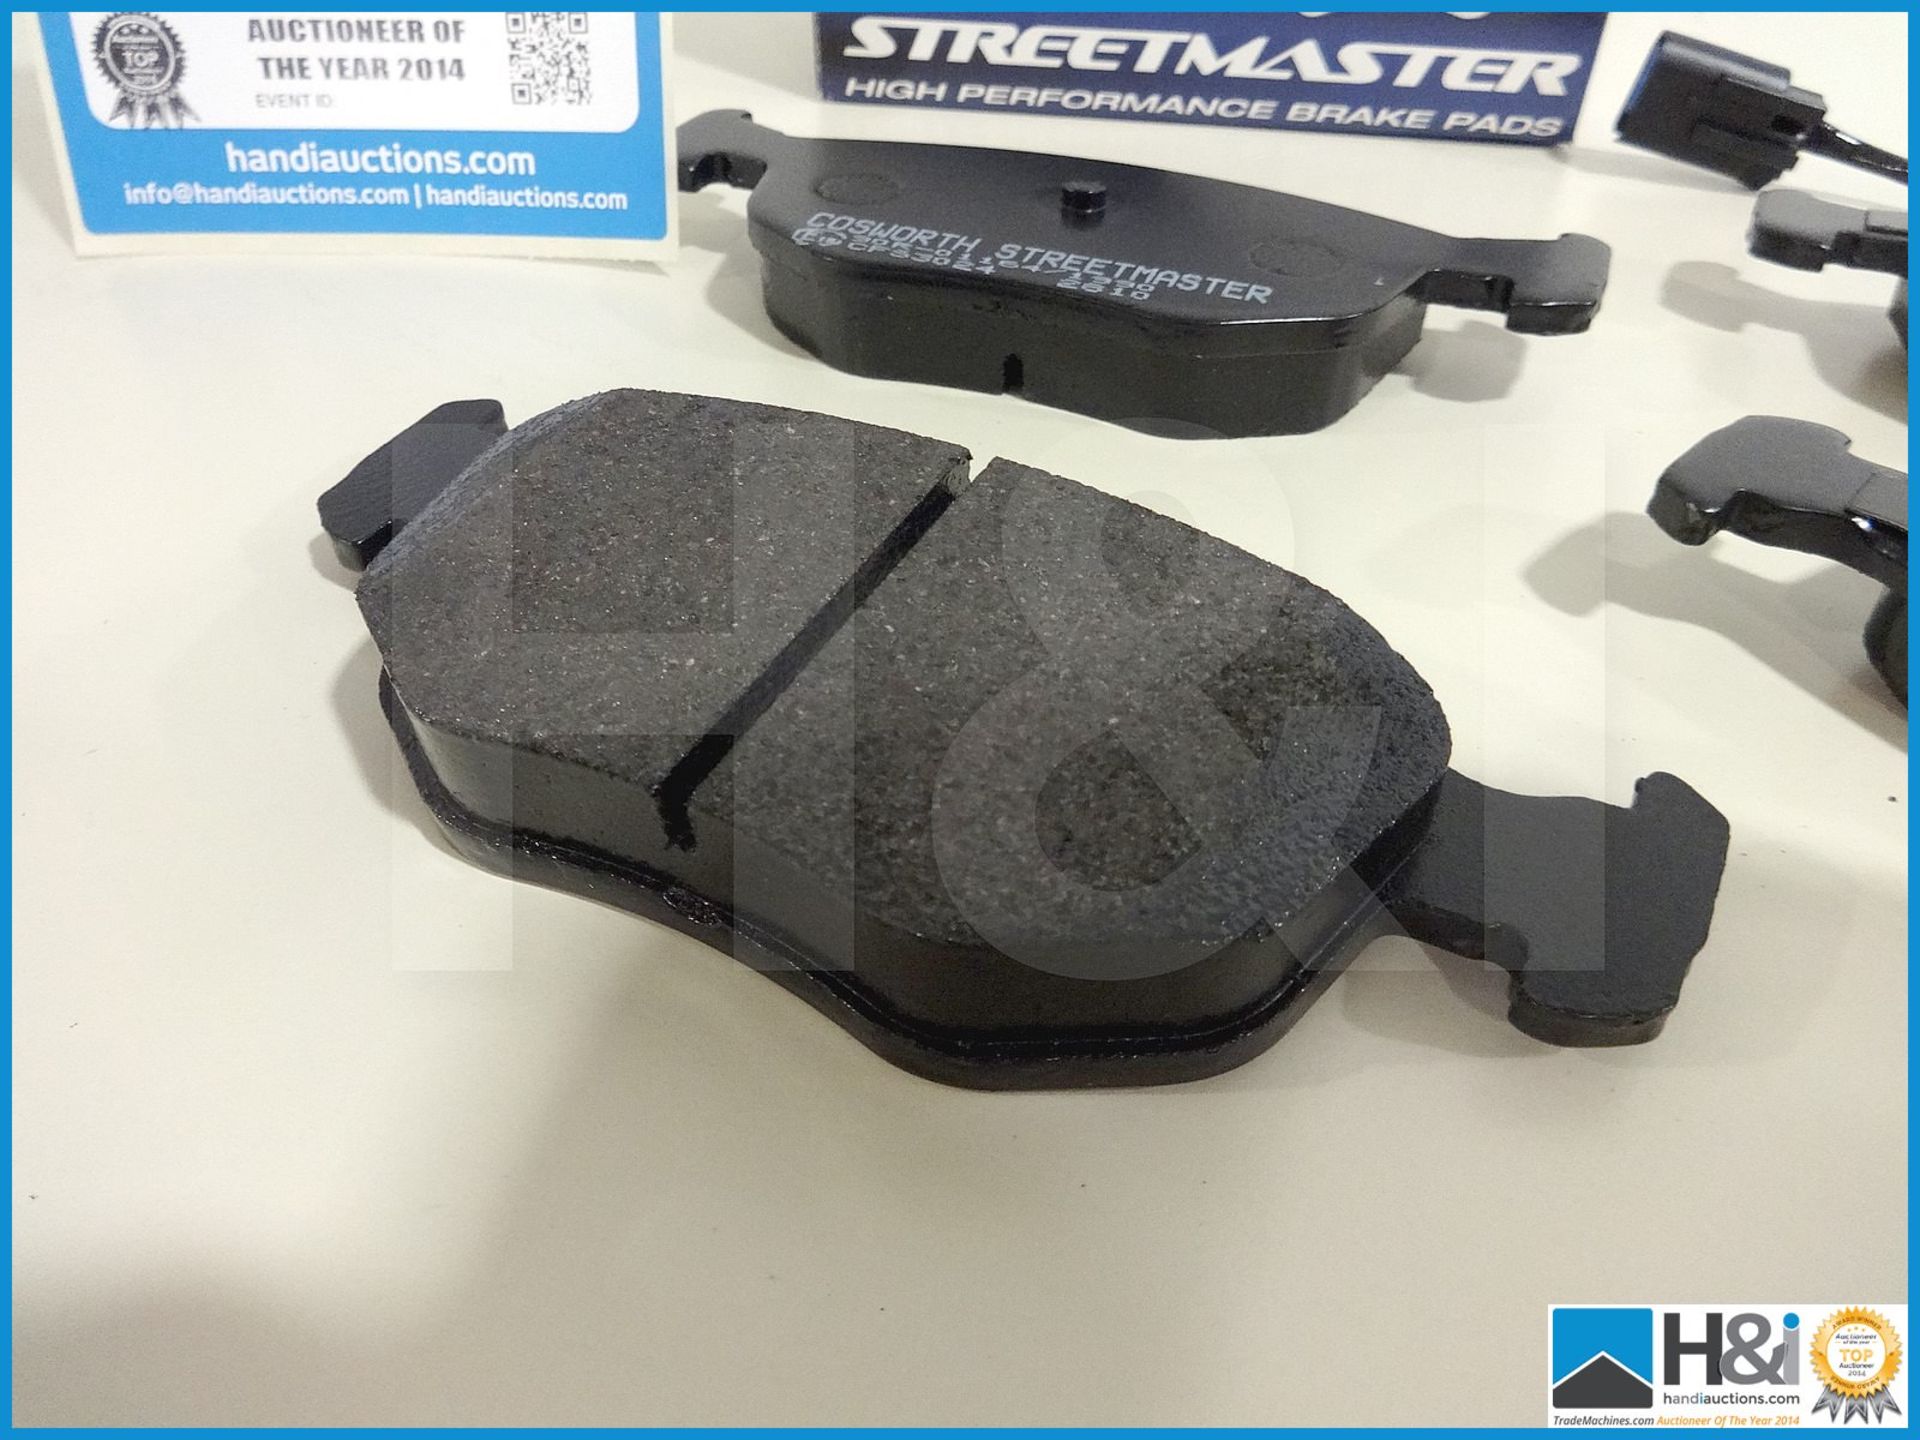 10 off Escort Cosworth 4WD 92-95 front brake pads. New and boxed. MC: CFS3024 CILN: 14 - Image 3 of 5